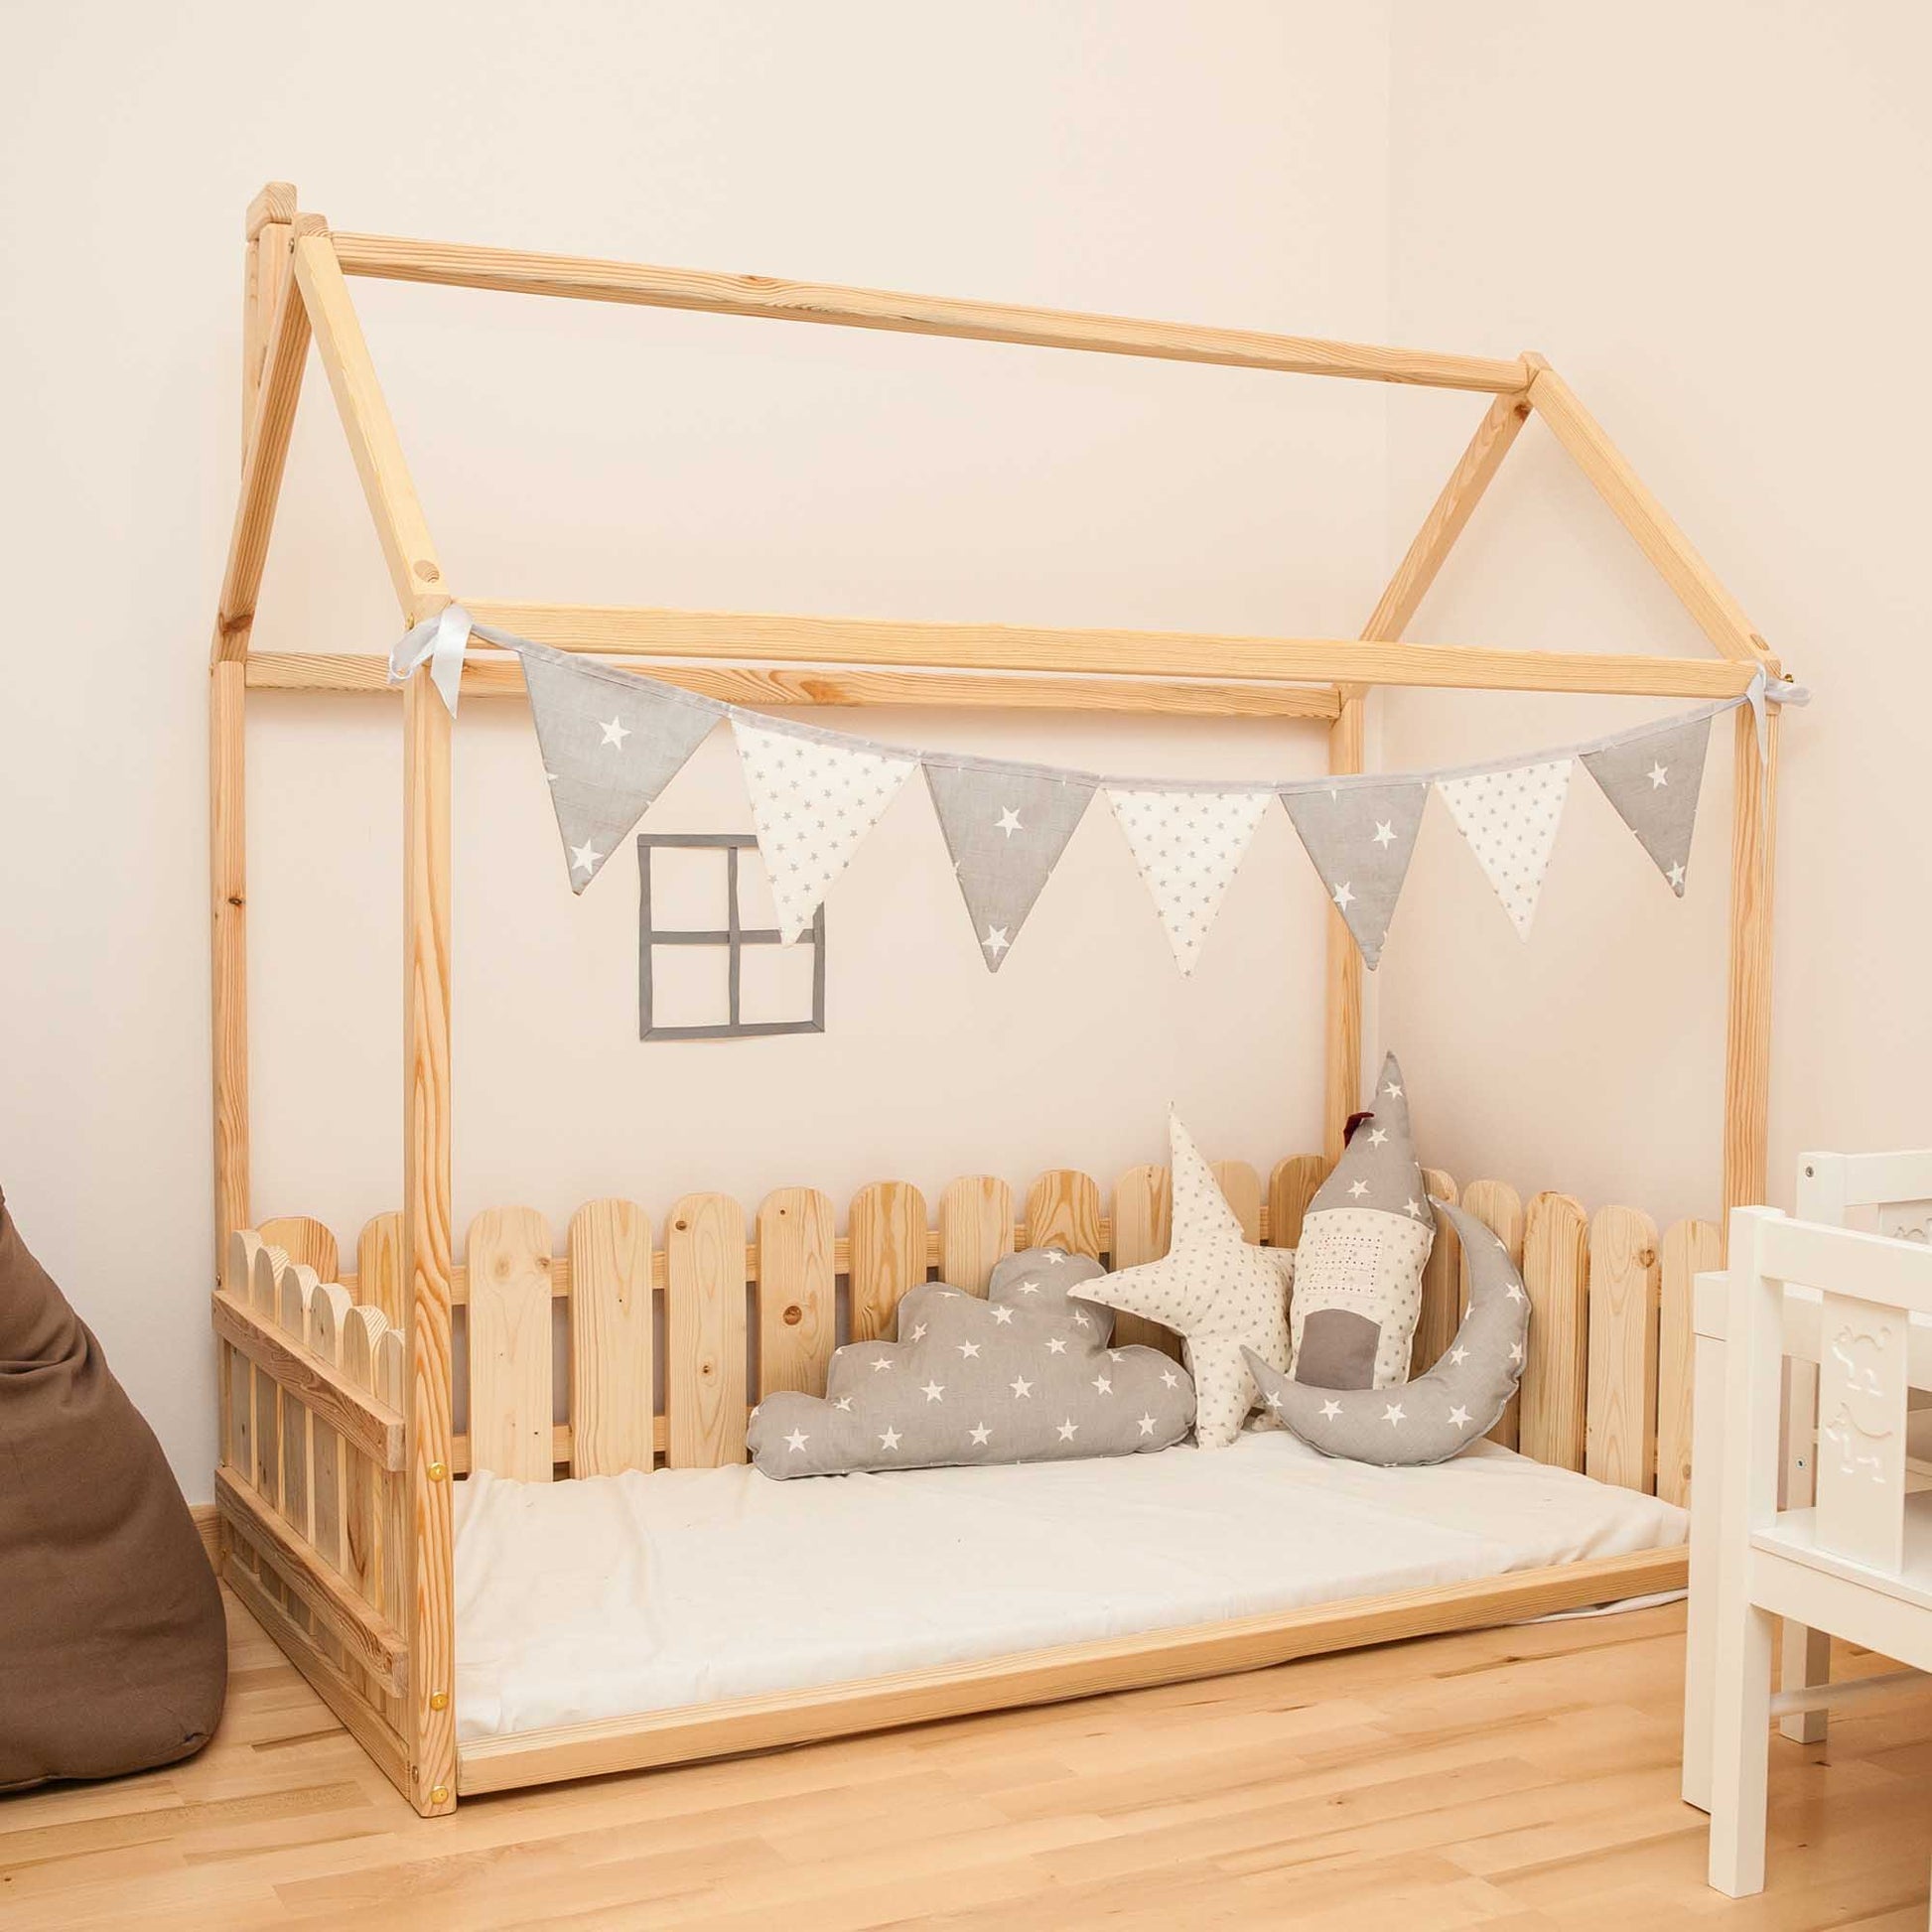 A floor house-frame bed with 3-sided picket fence rails in a child's room.